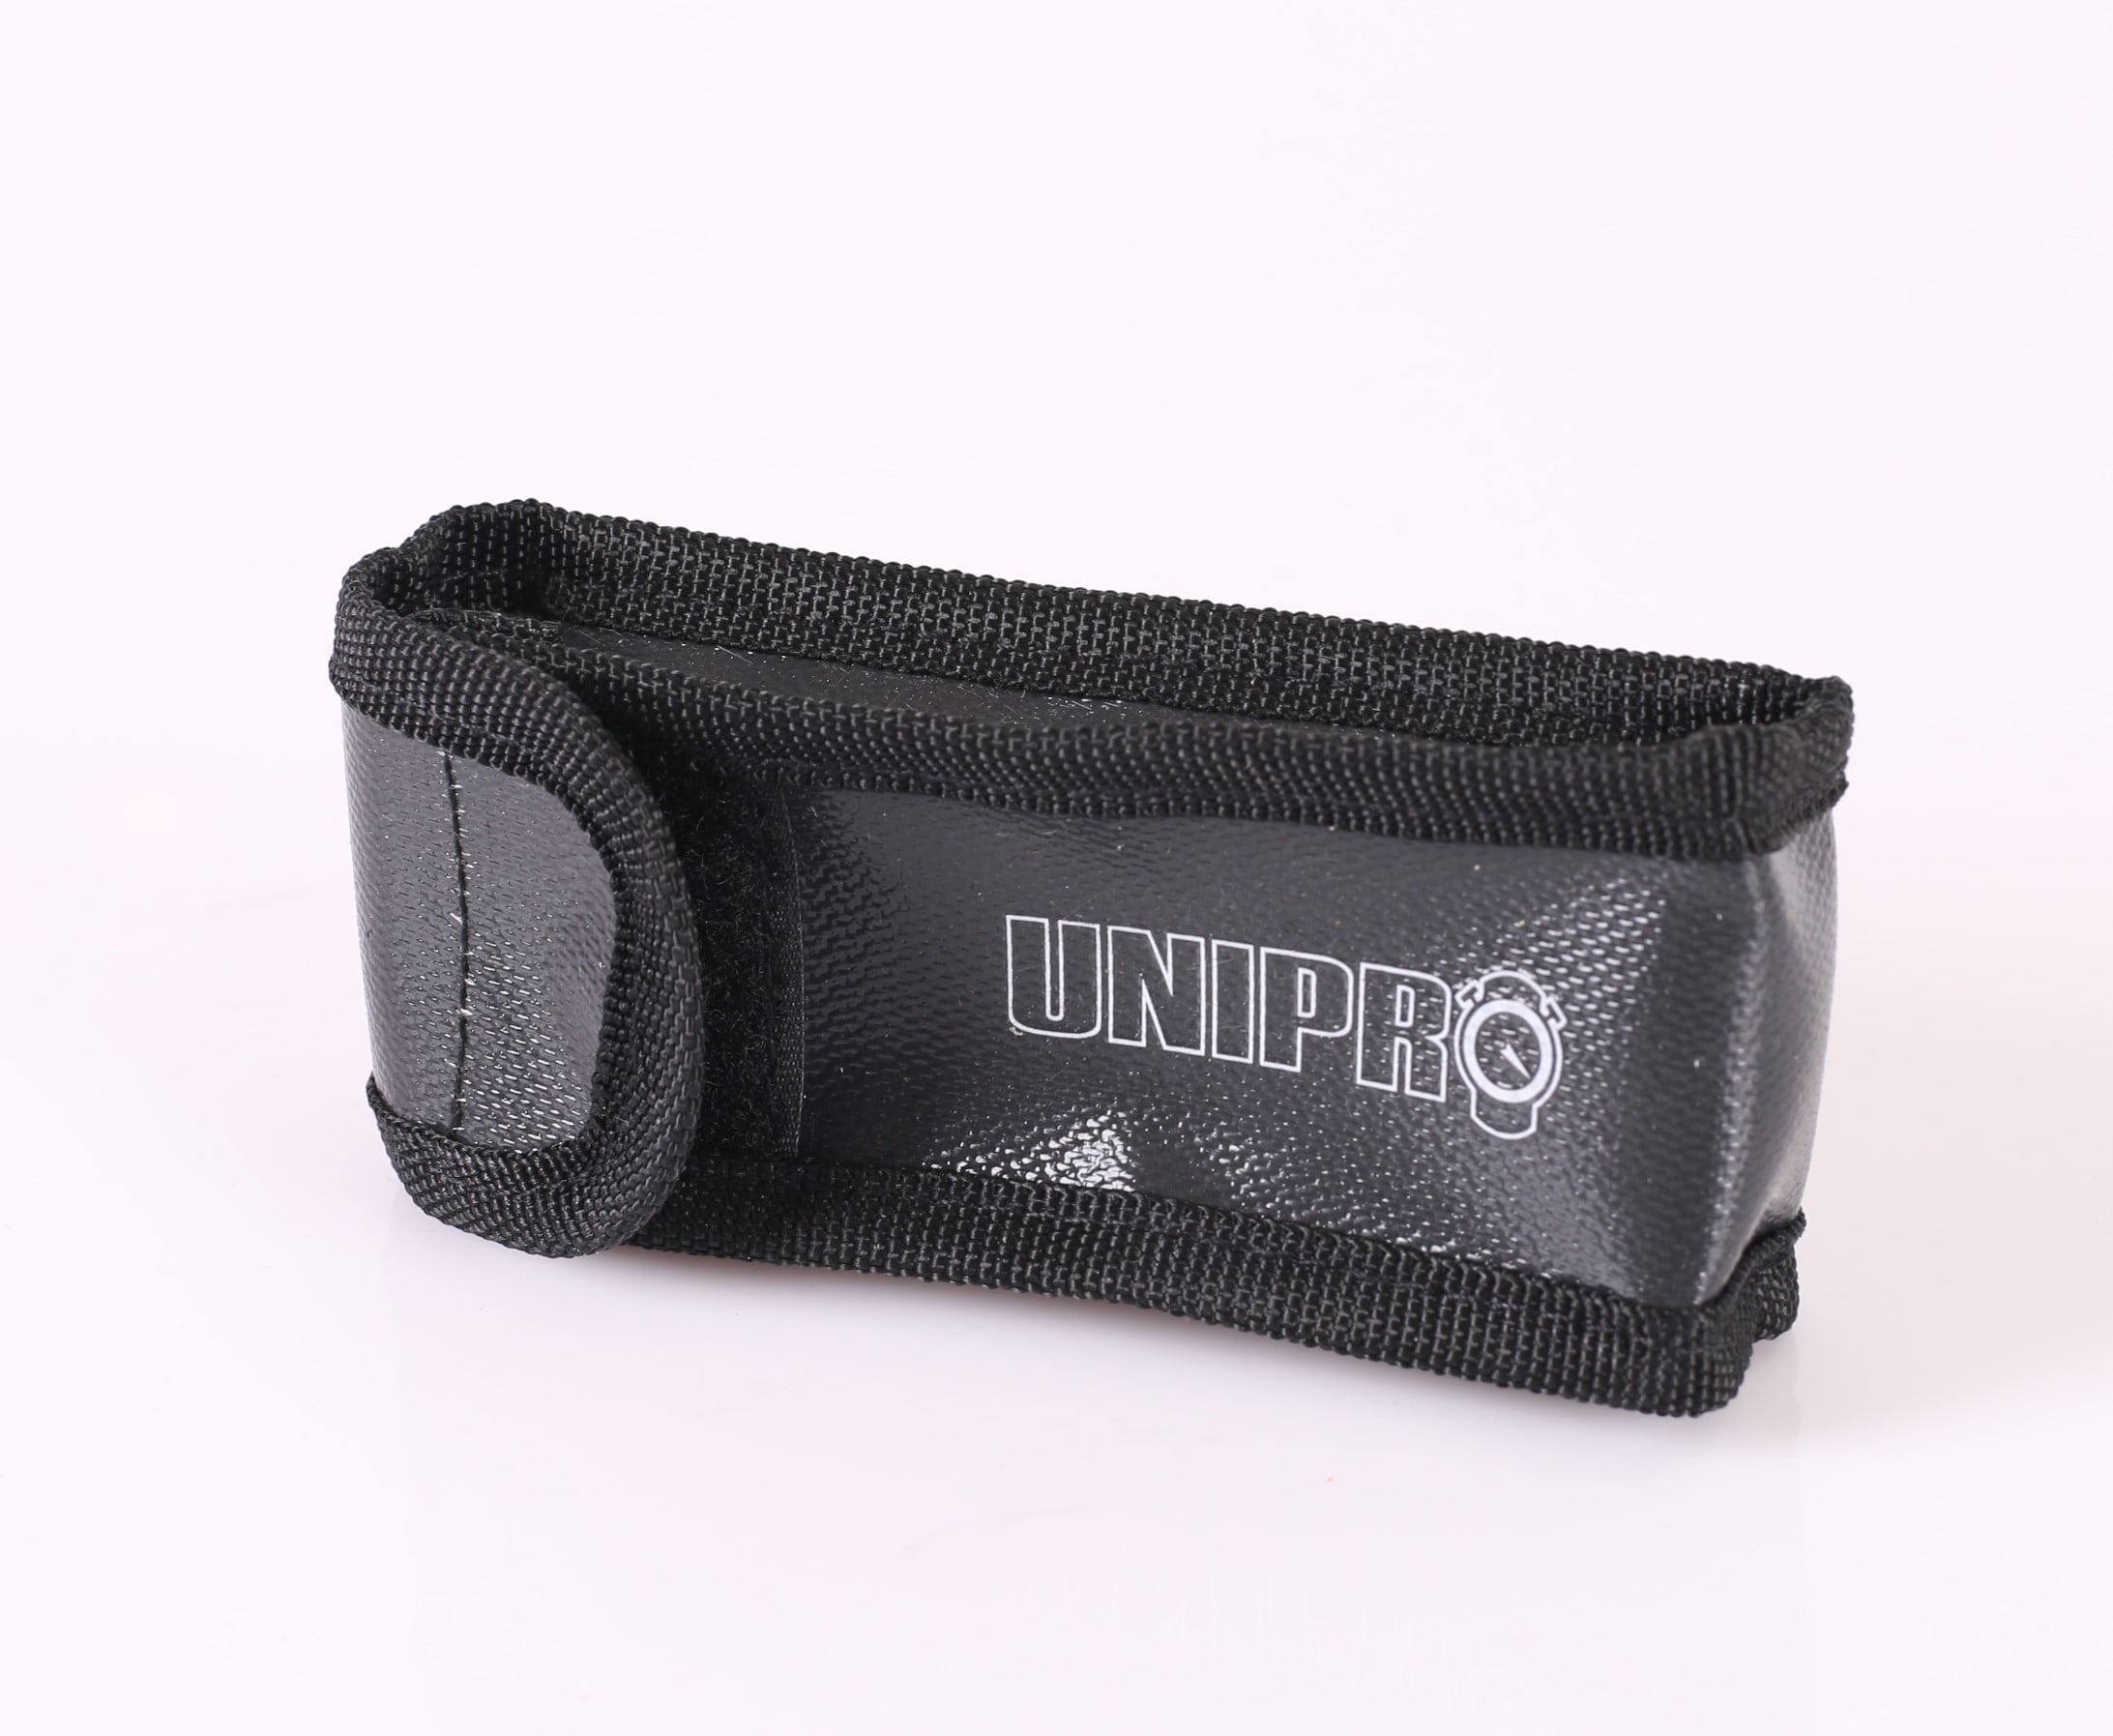 Safety Bag for Unipro Lipo Battery